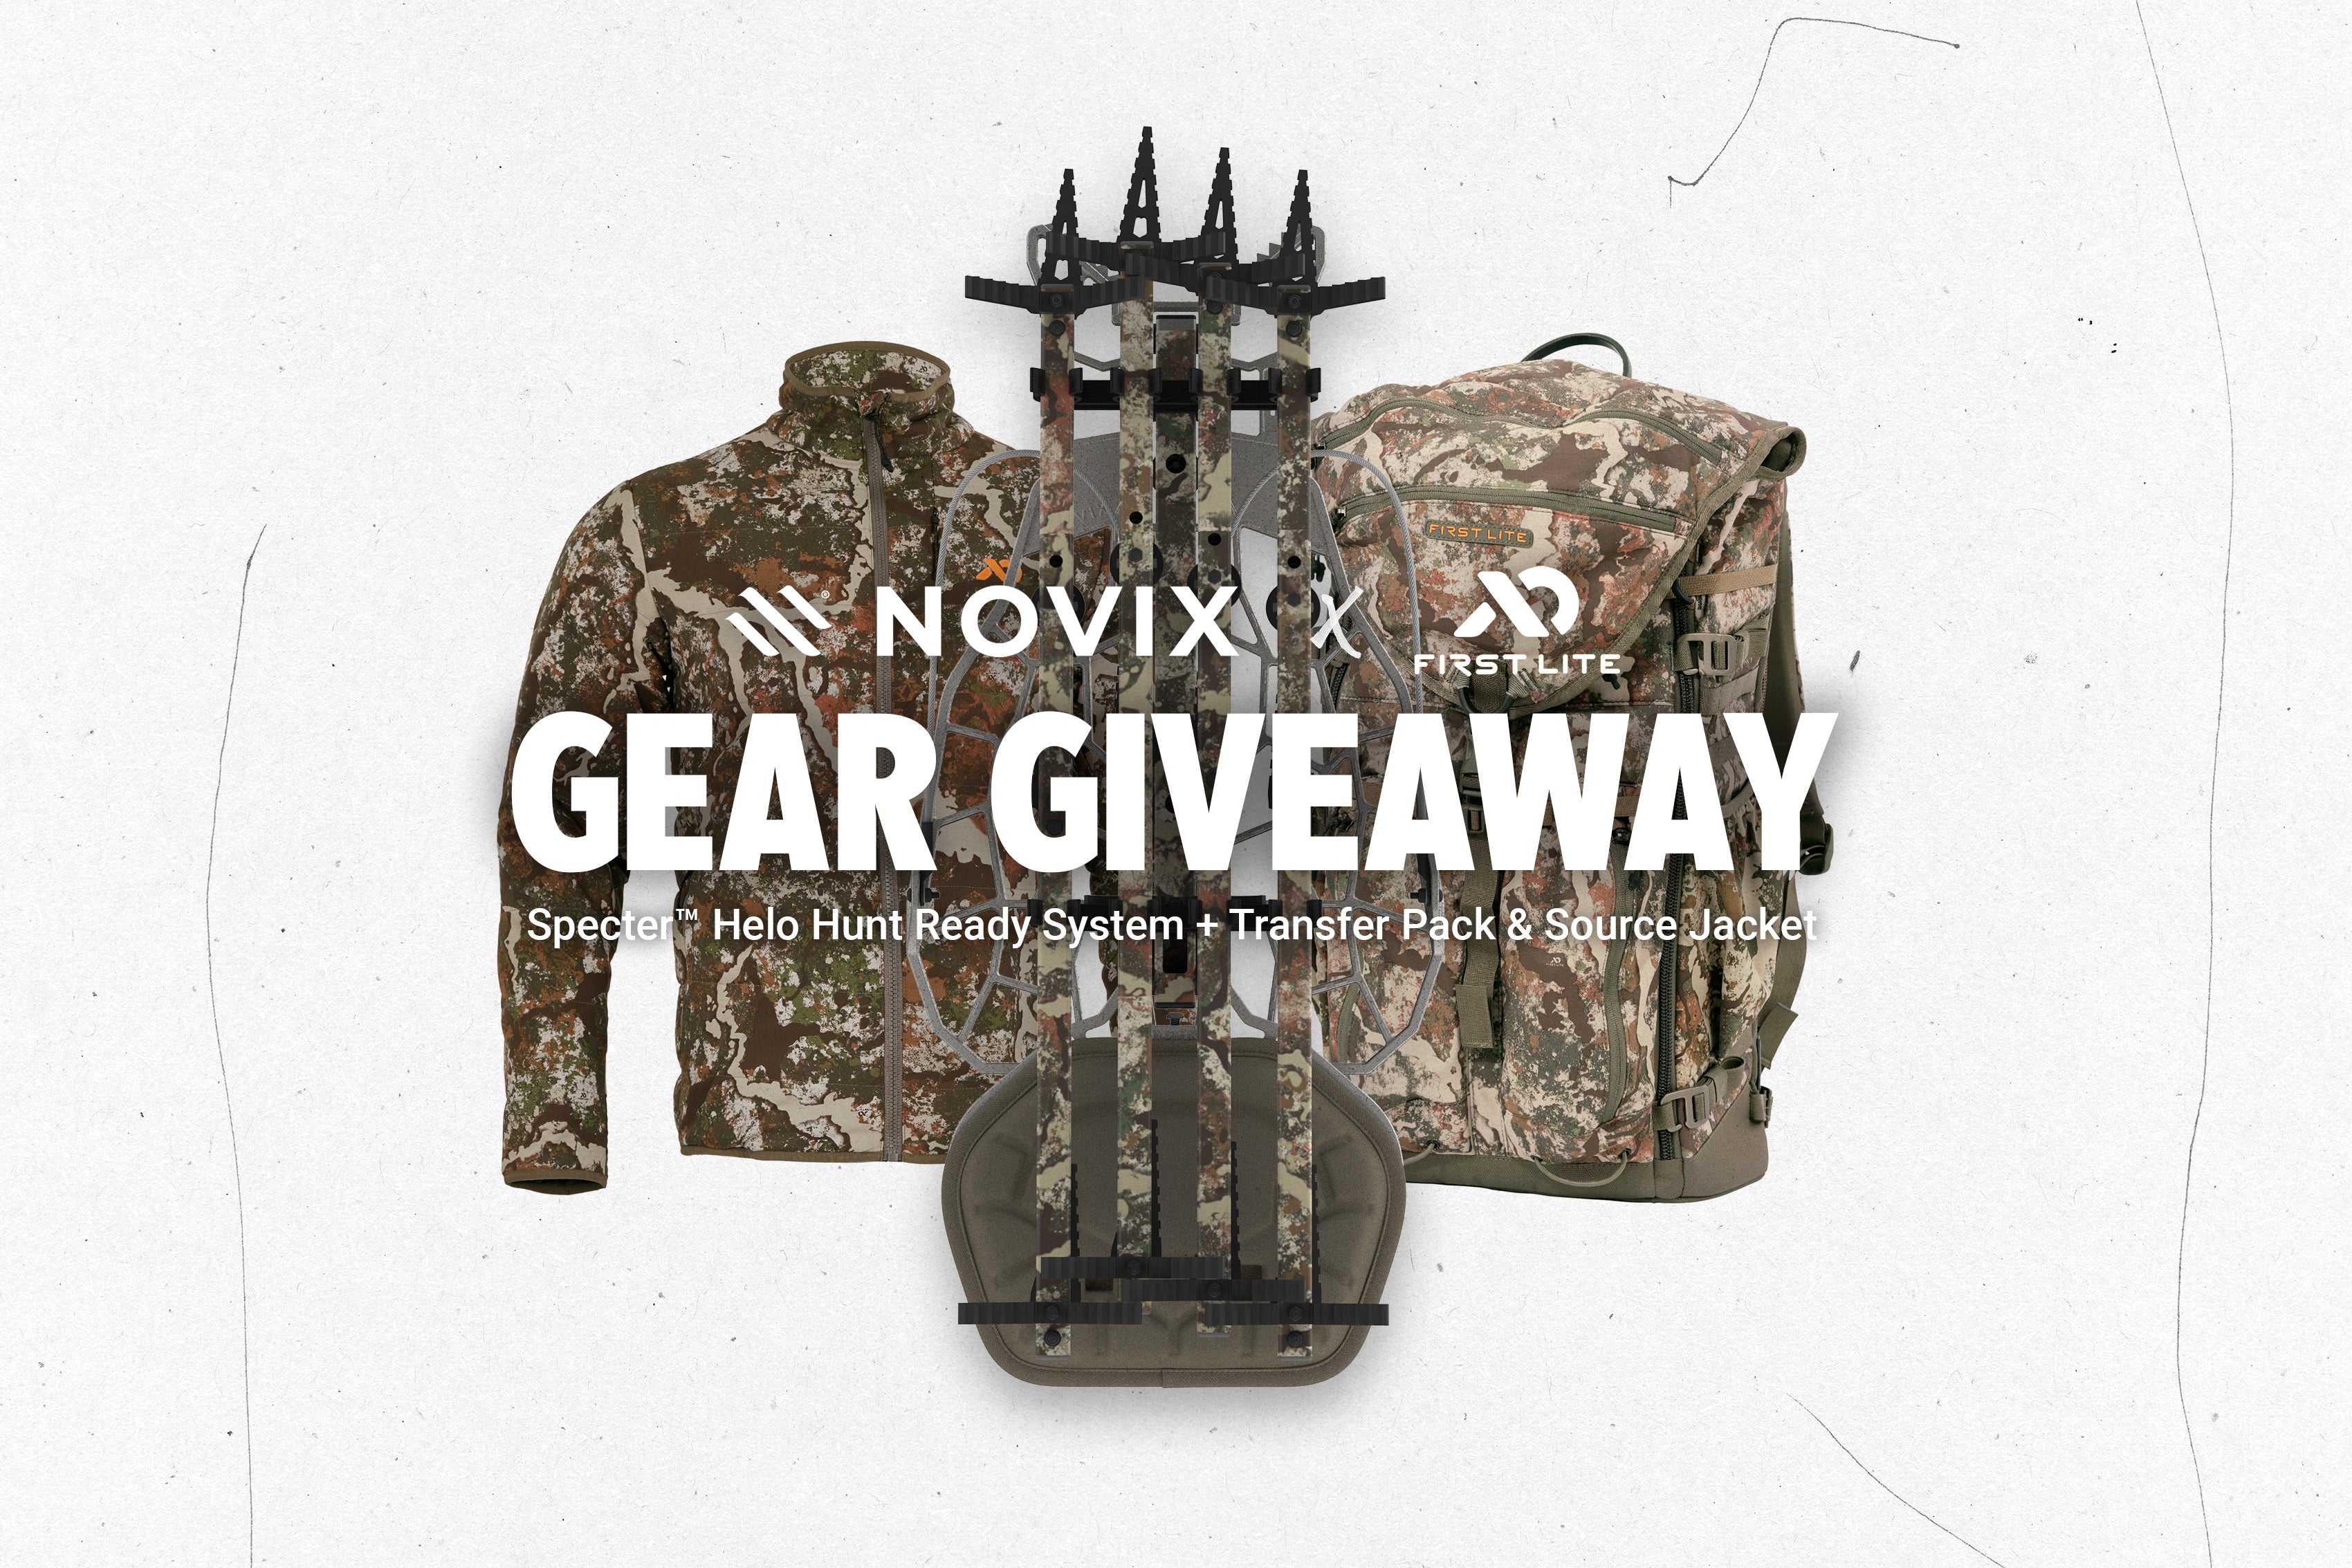 First Lite Helo Hunt Ready Giveaway – Novix Outdoors